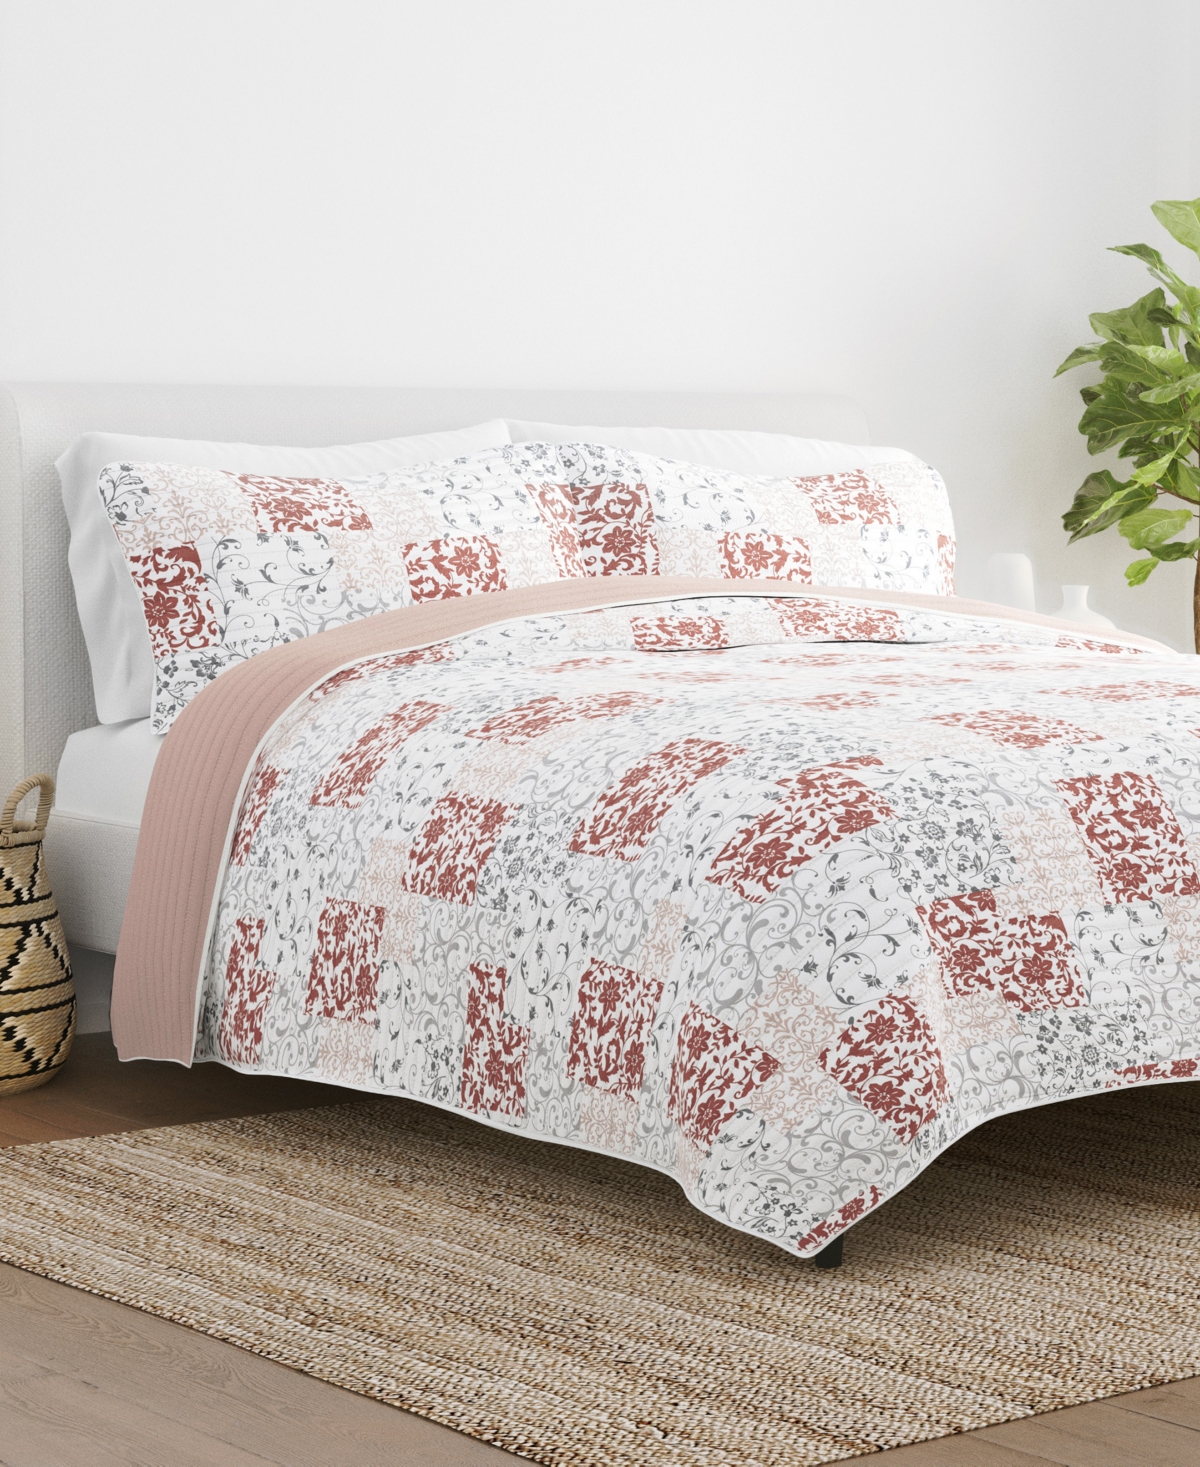 Ienjoy Home All Season 3 Piece Scrolled Patchwork Reversible Quilt Set, Full/queen In Blush